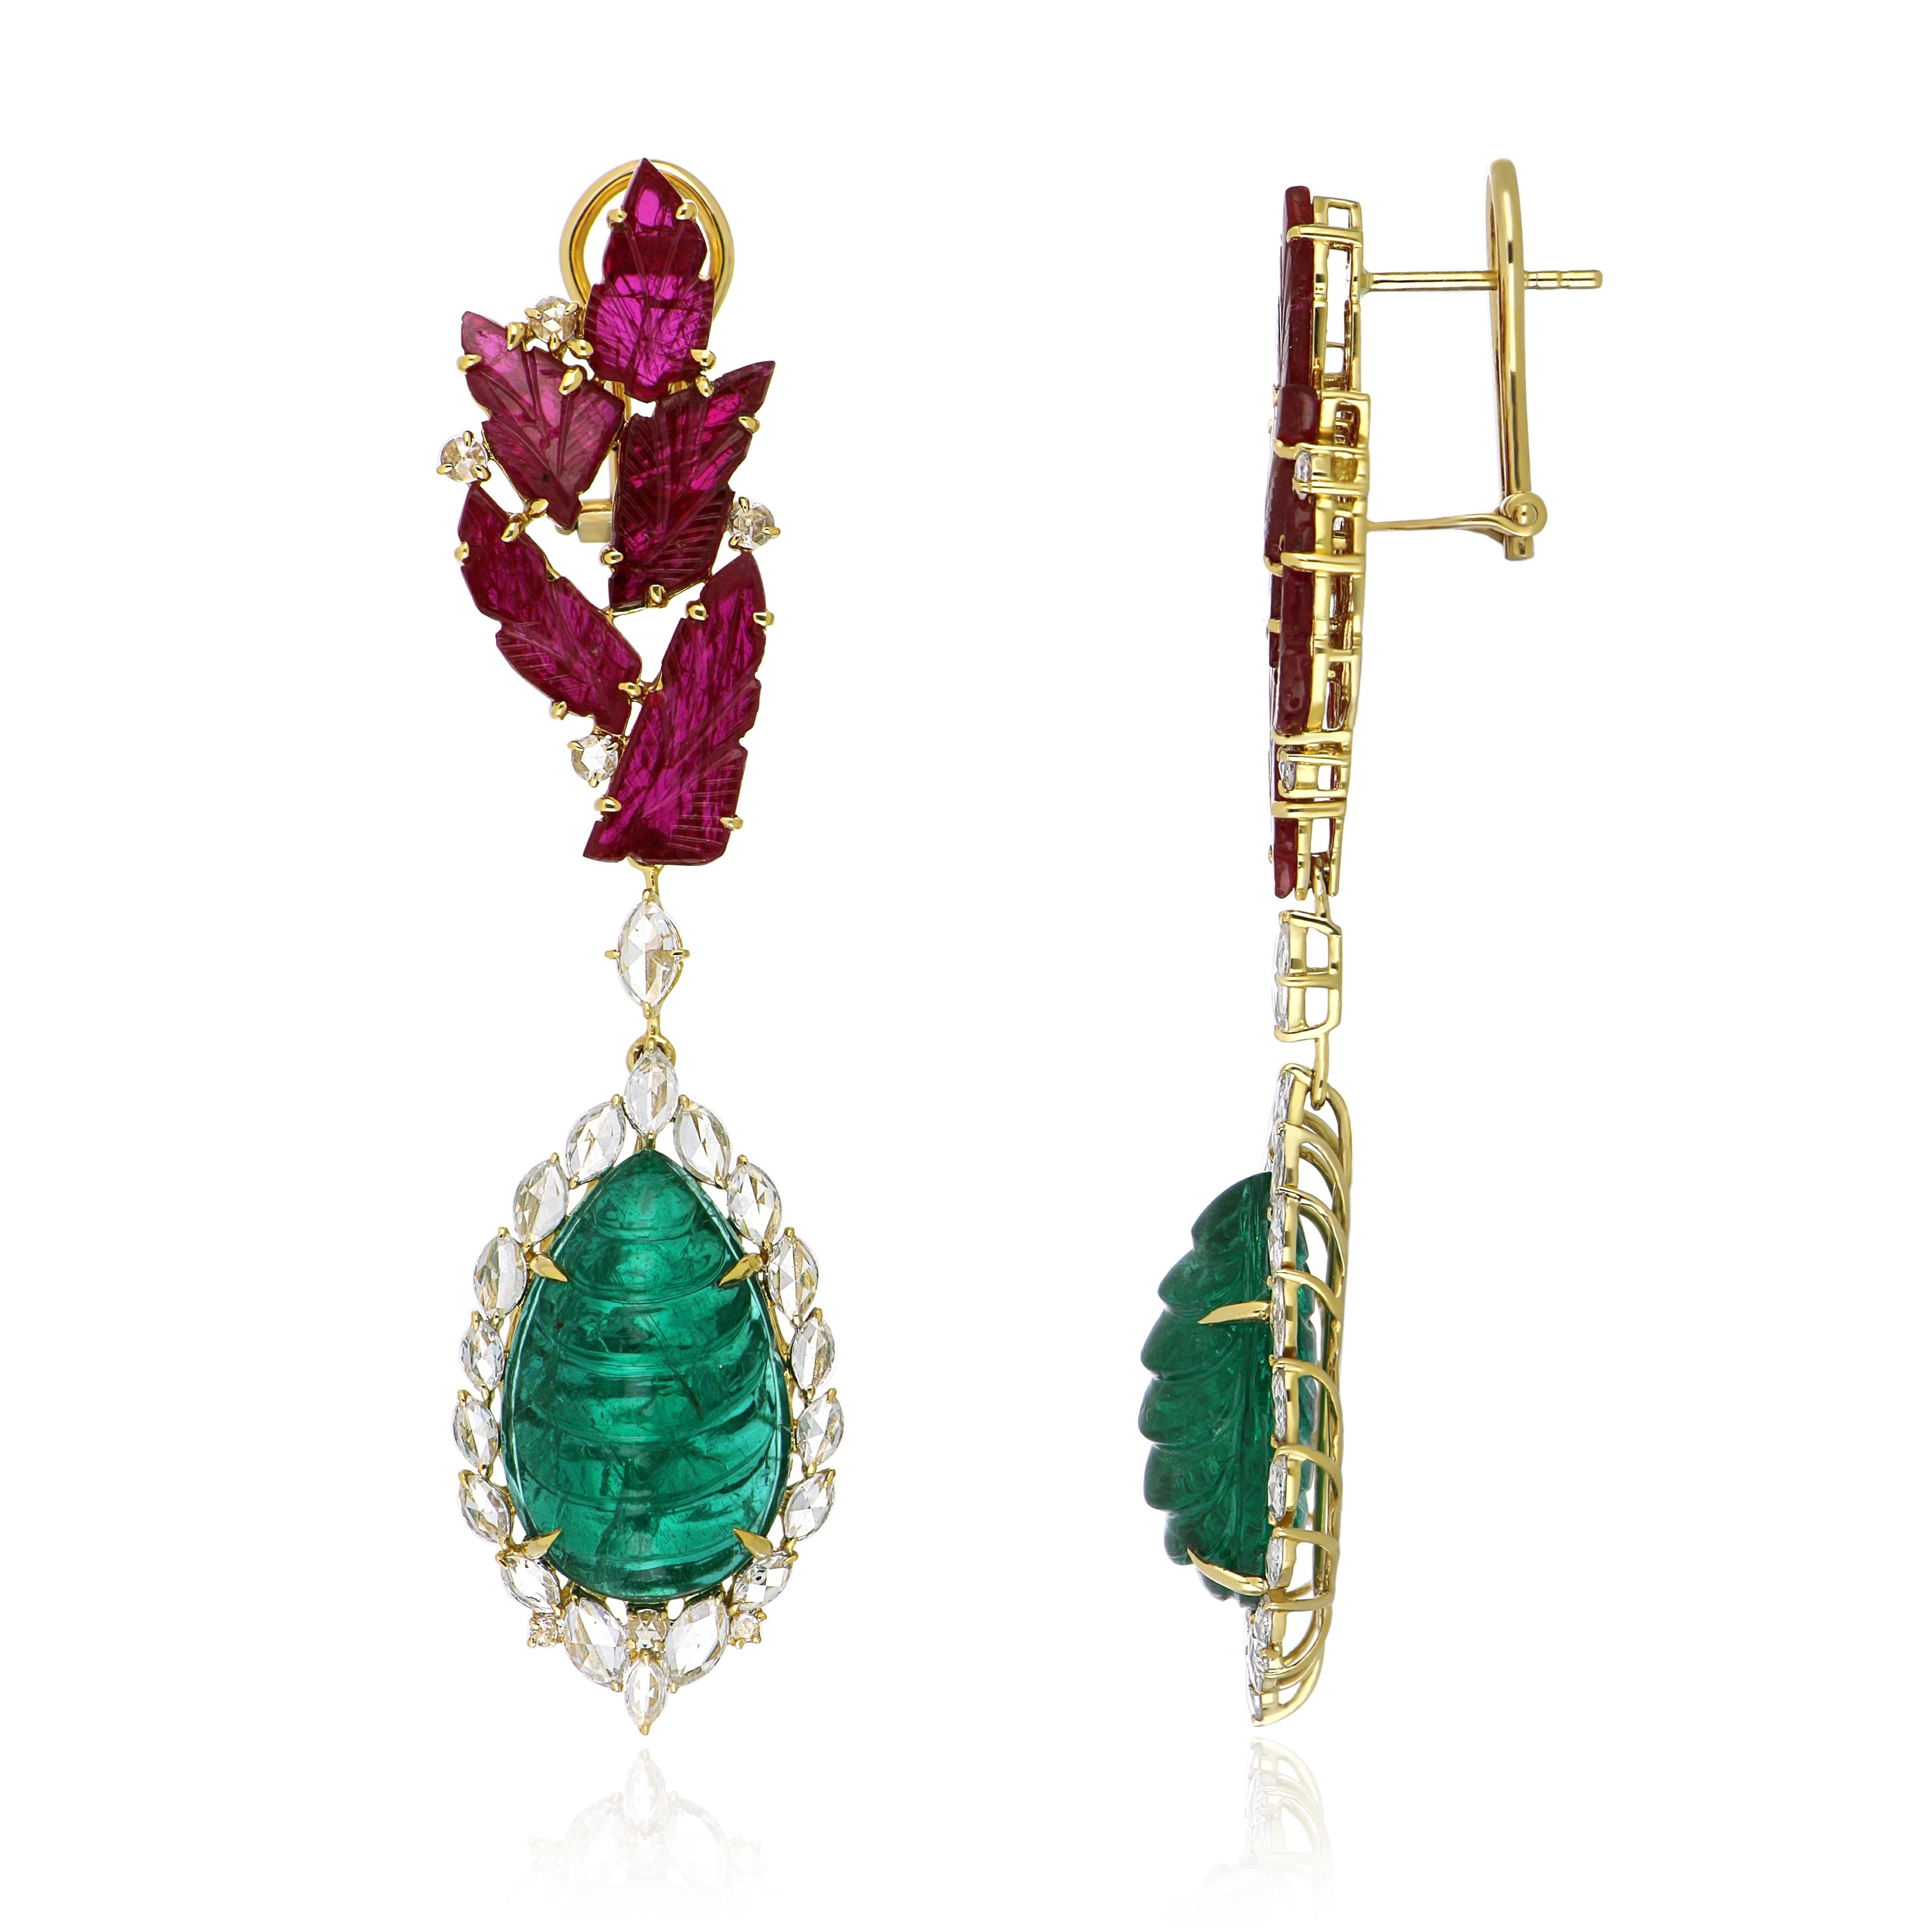 18 Karat Yellow Gold Earrings studded with beautifully Hand Carved Emerald Pear Cabochon Weighing around 24.00 Cts (total wt.) surrounded with beautiful halo of Marquise shaped Rose Cut diamonds weighing approx. 1.67 Cts (total wt.). Further